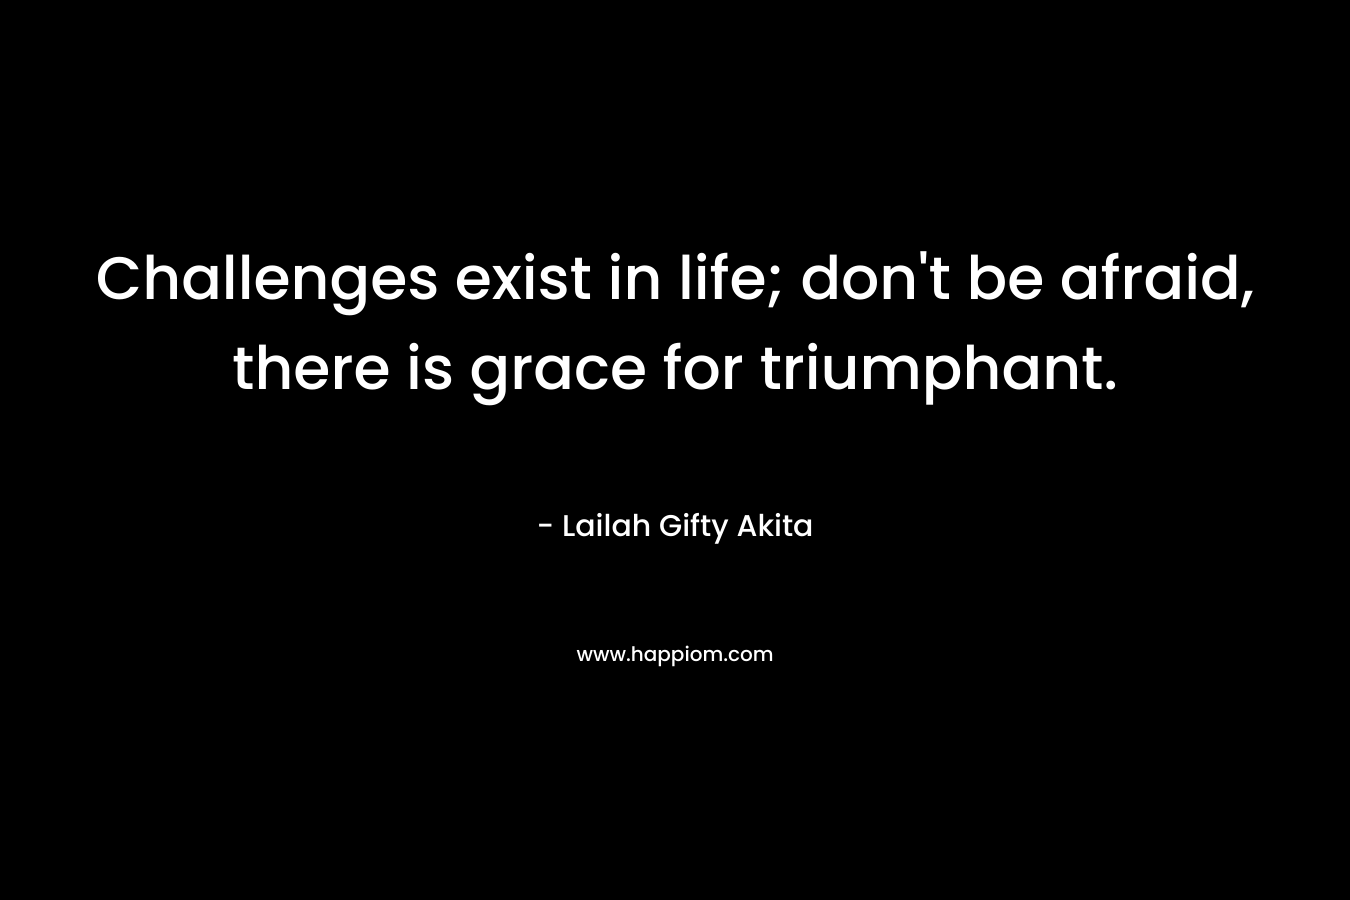 Challenges exist in life; don't be afraid, there is grace for triumphant.